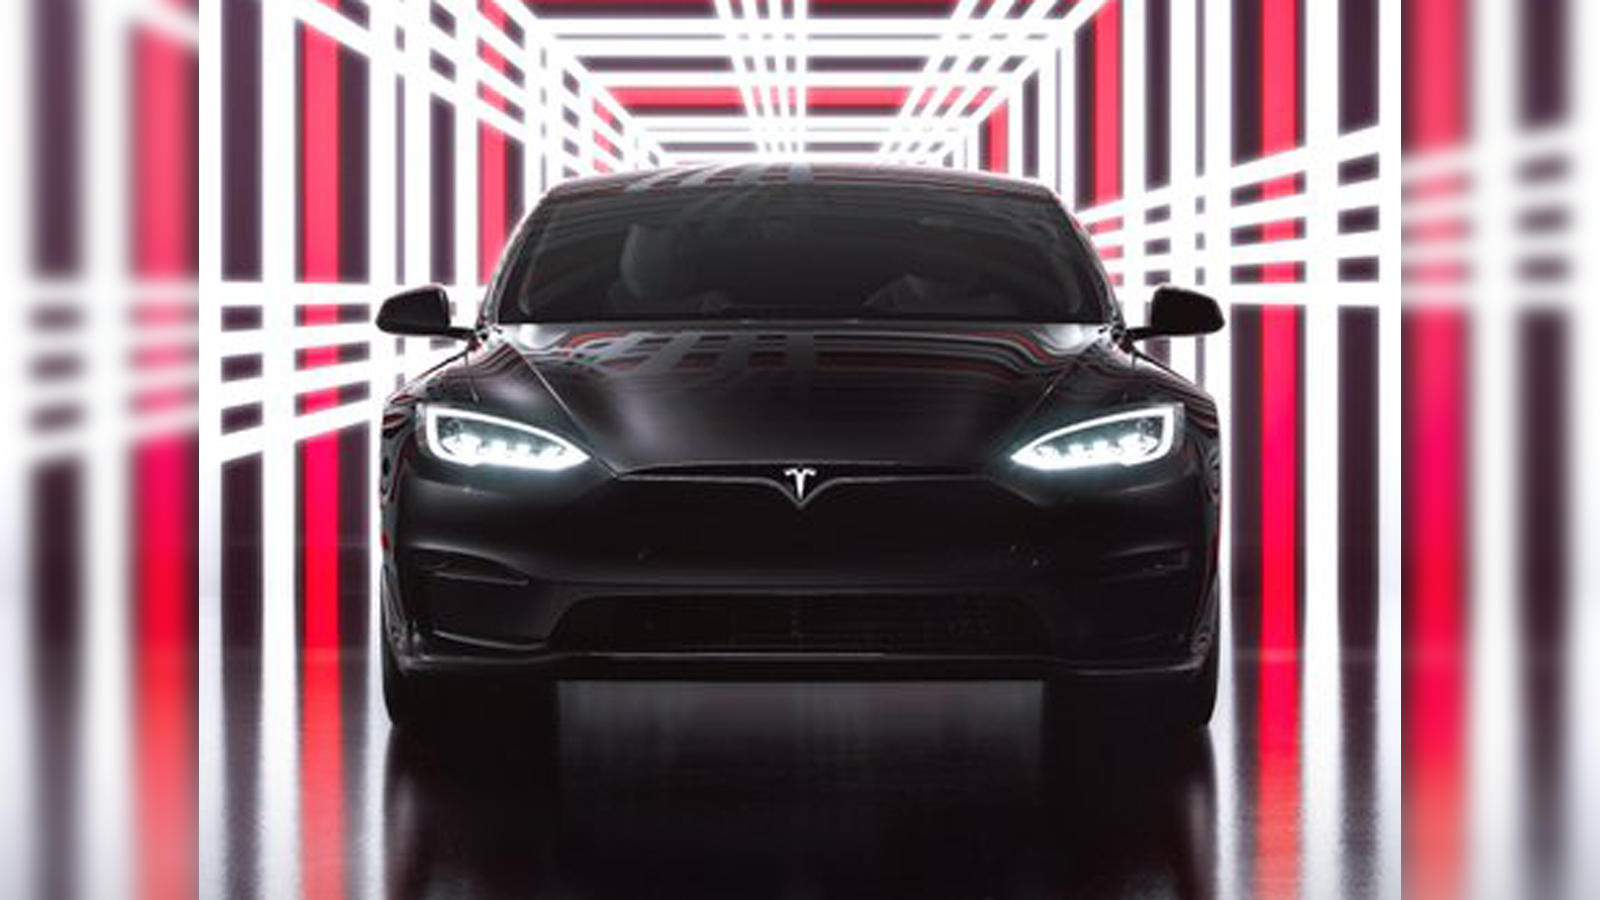 Watch out, Porsche! Tesla's Model S 'Plaid' will come with sleek design &  long driving range - The Economic Times